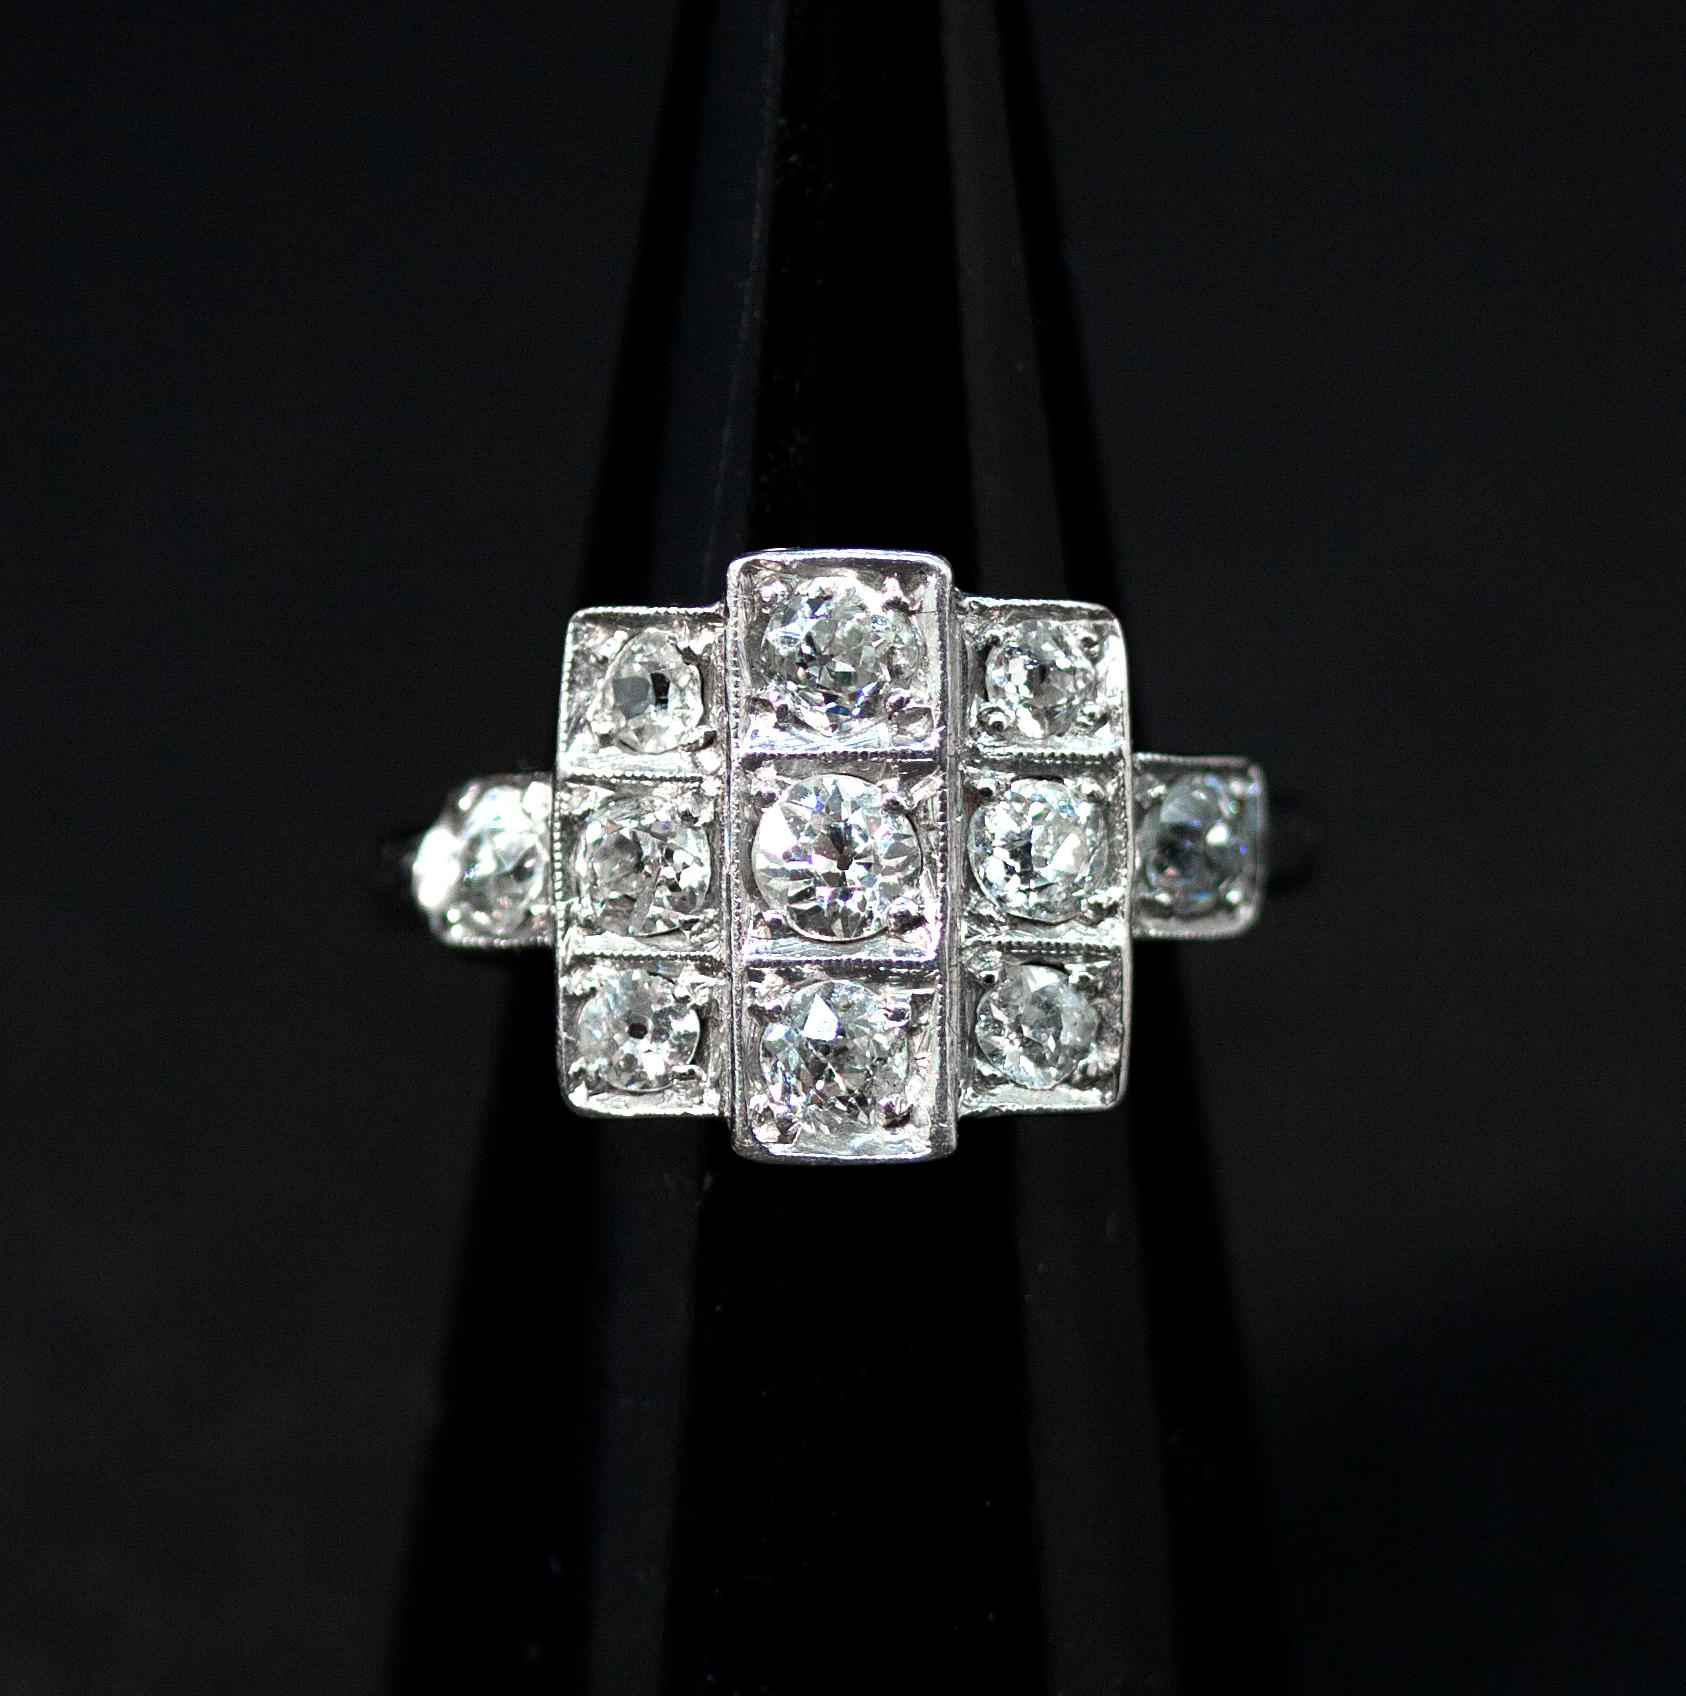 Antique brilliant cut old diamond ring:
Nine brilliant cut diamonds centered in a square cluster with overhanging center row flanked by two further brilliant cut diamonds on the shoulders, all diamonds have an estimated total weight of 1.3 carats,